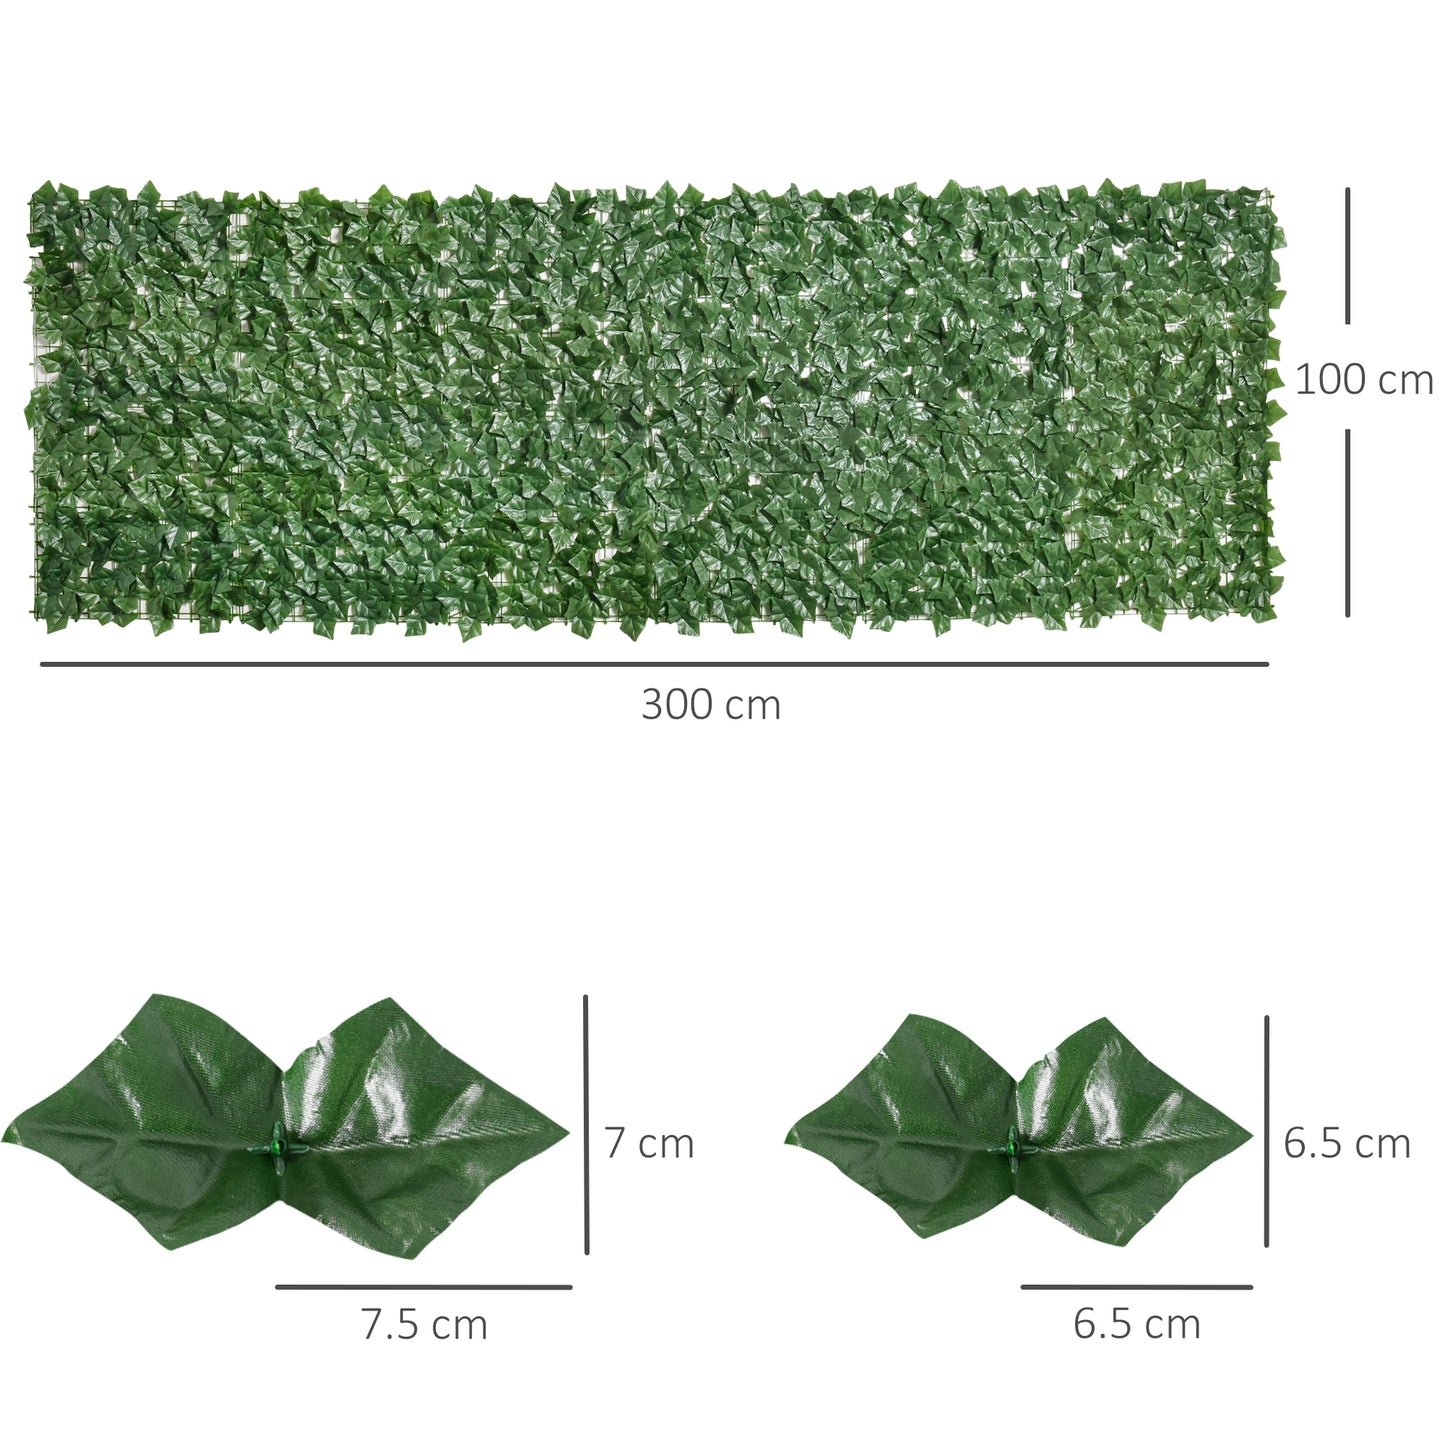 Outsunny 2-Piece Artificial Leaf Hedge Screen Privacy Fence Panel for Garden Outdoor Indoor Decor, Dark Green, 3M x 1M